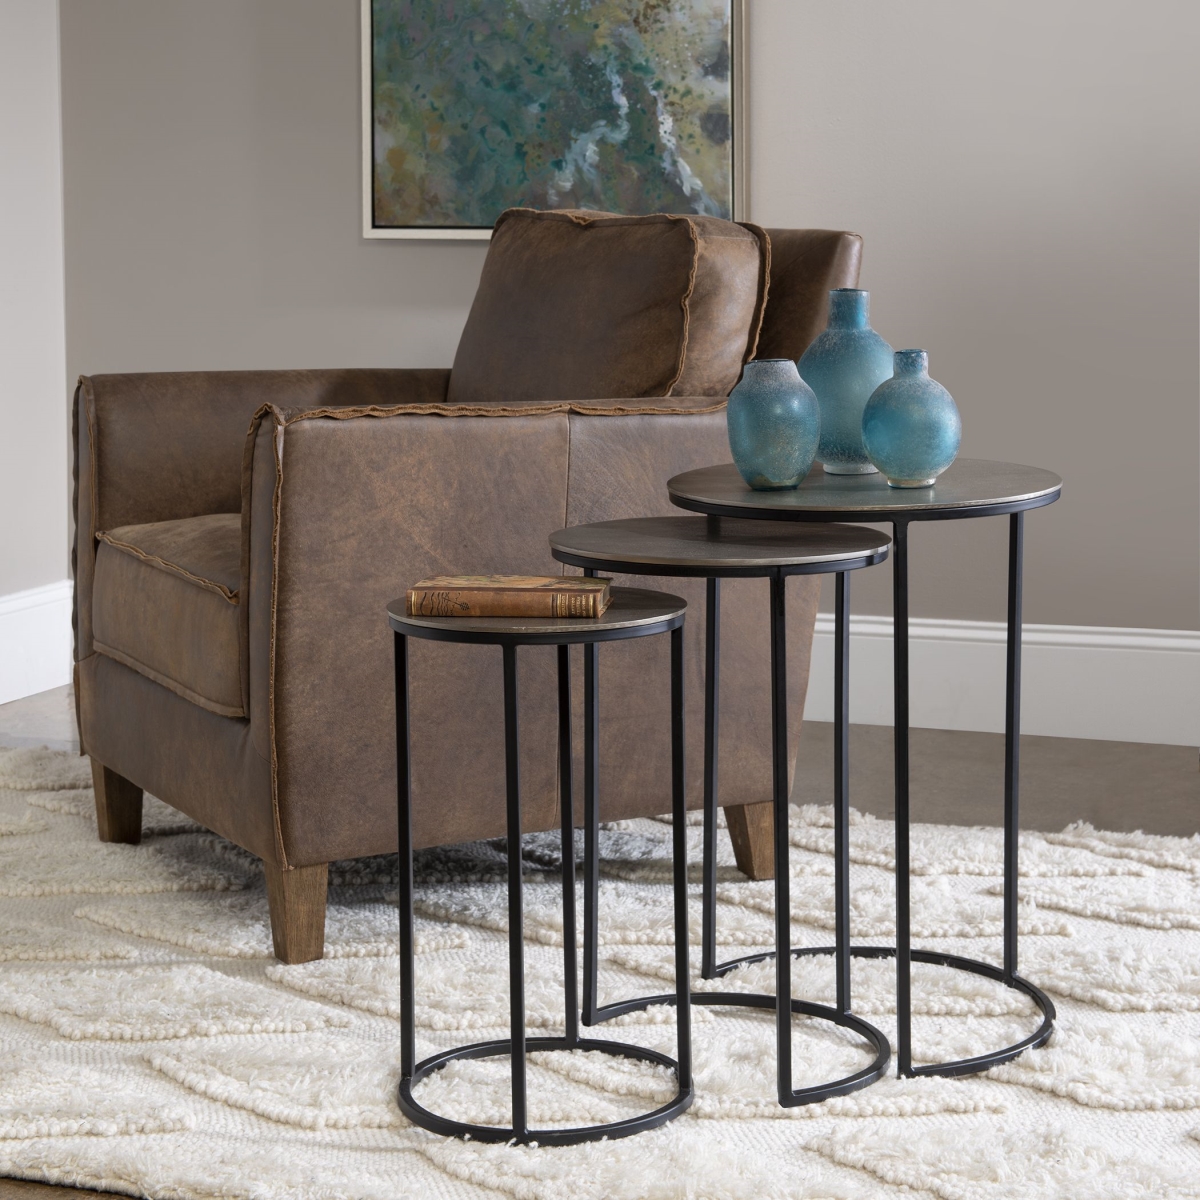 Picture of 212 Main 25057 20 x 20 x 25 in. Erik Metal Nesting Tables  Set of 3